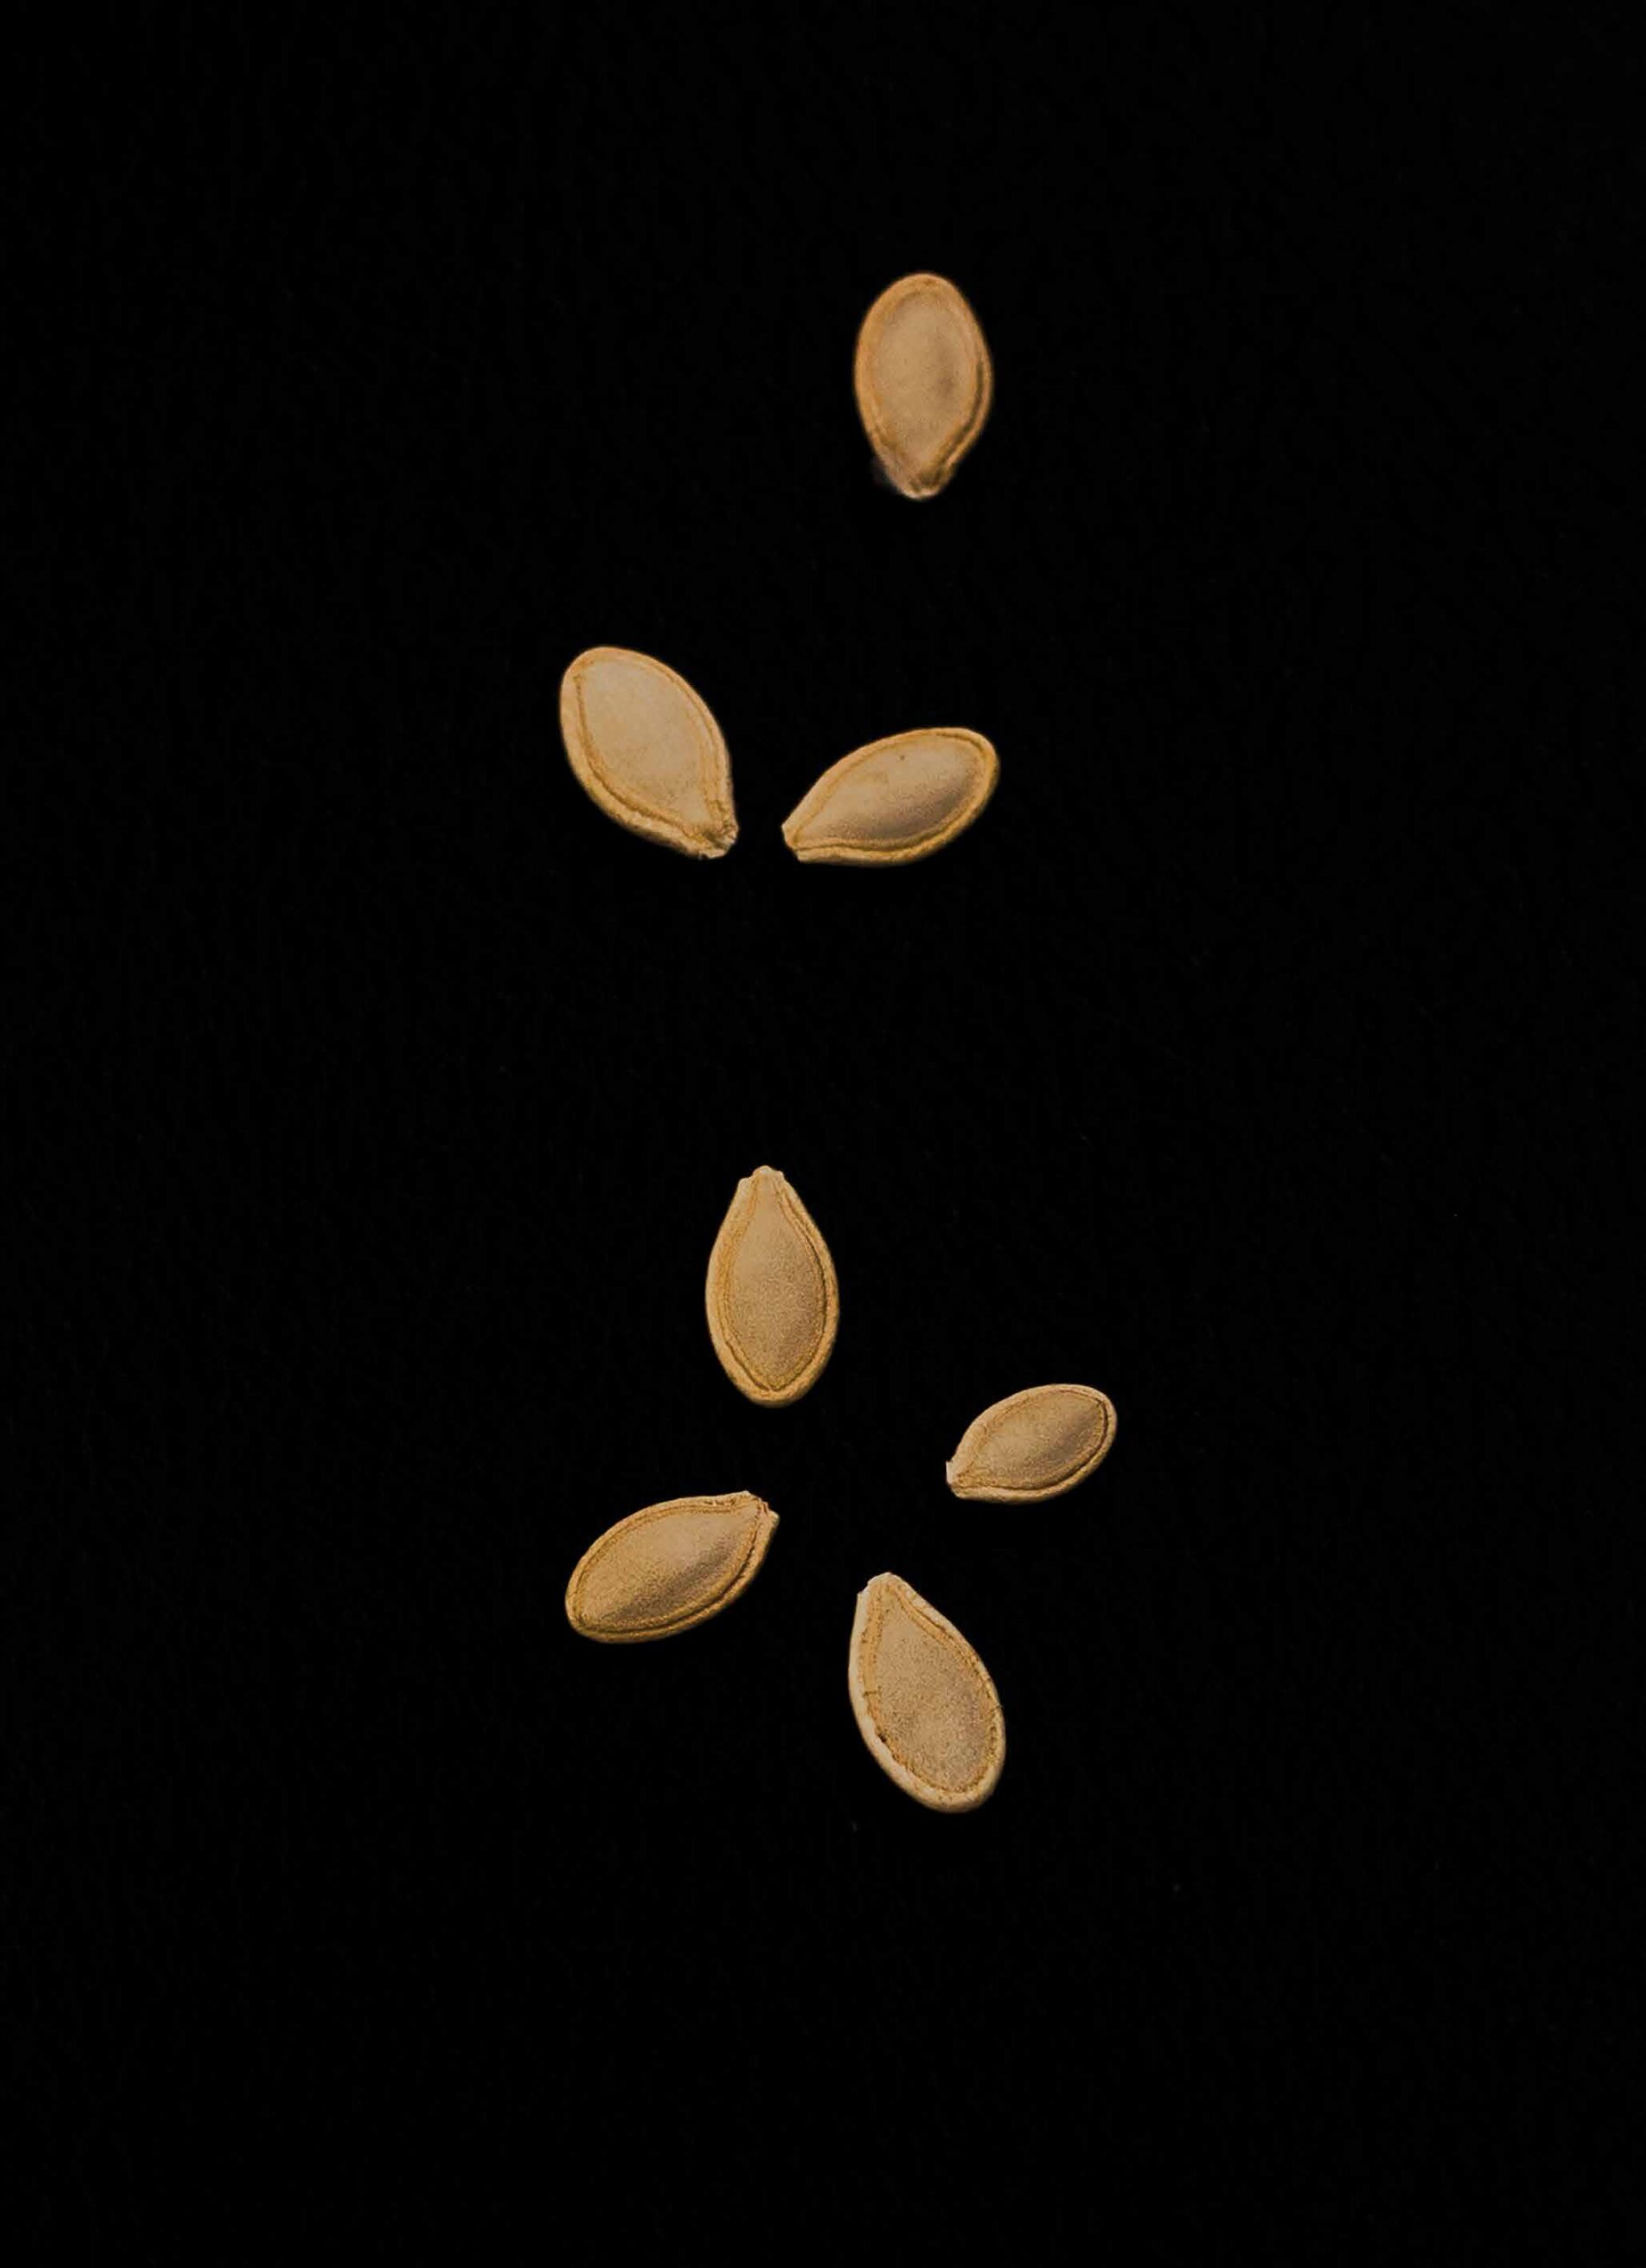 A black background with seven beige oval seeds laid out on it.